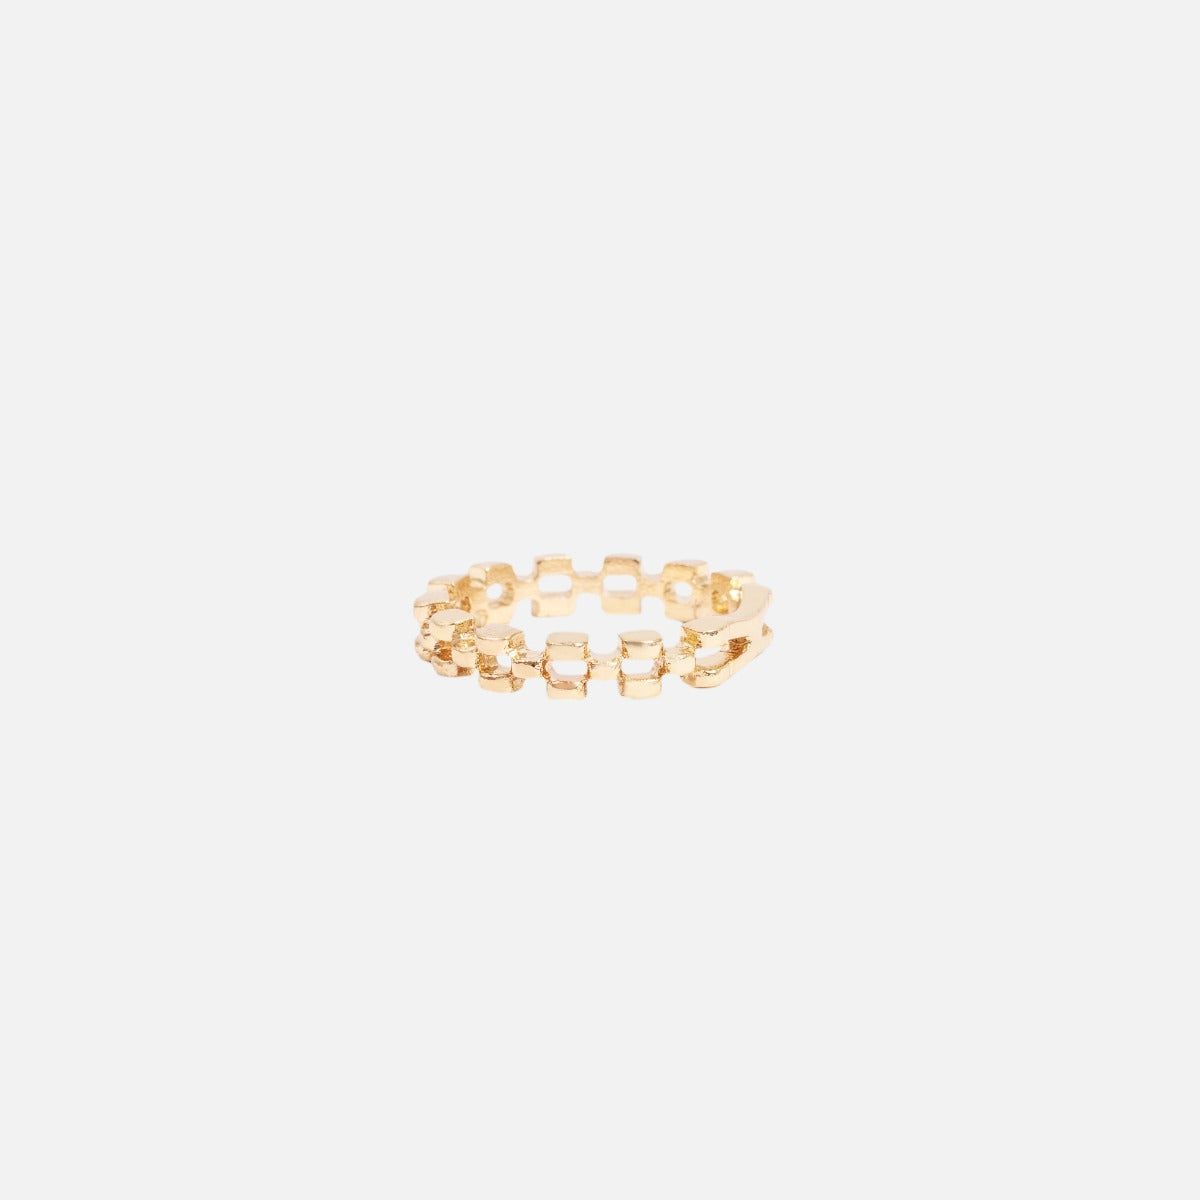 Set of five gold rings